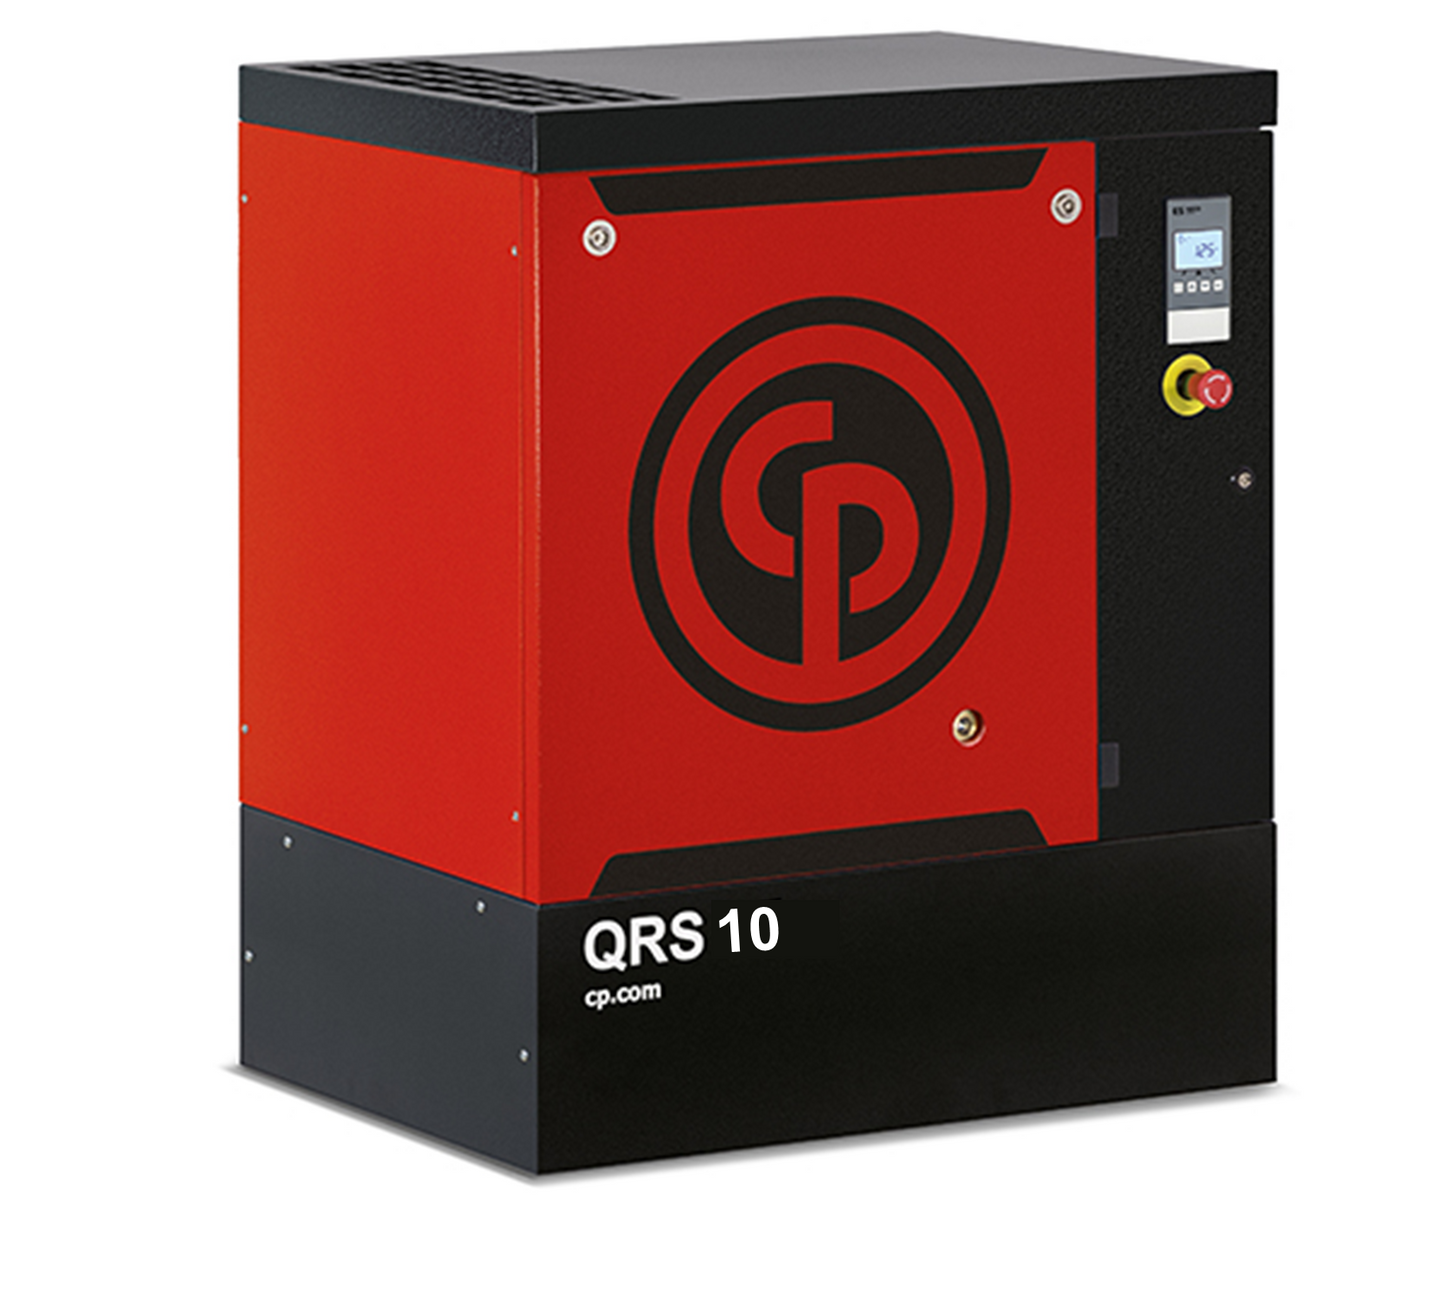 Chicago Pneumatic QRS 10 HP Base Mount Rotary Screw Air Compressor | 38.8 CFM@125 PSI, 208-230/460 volt, 3 Phase | 4152022912